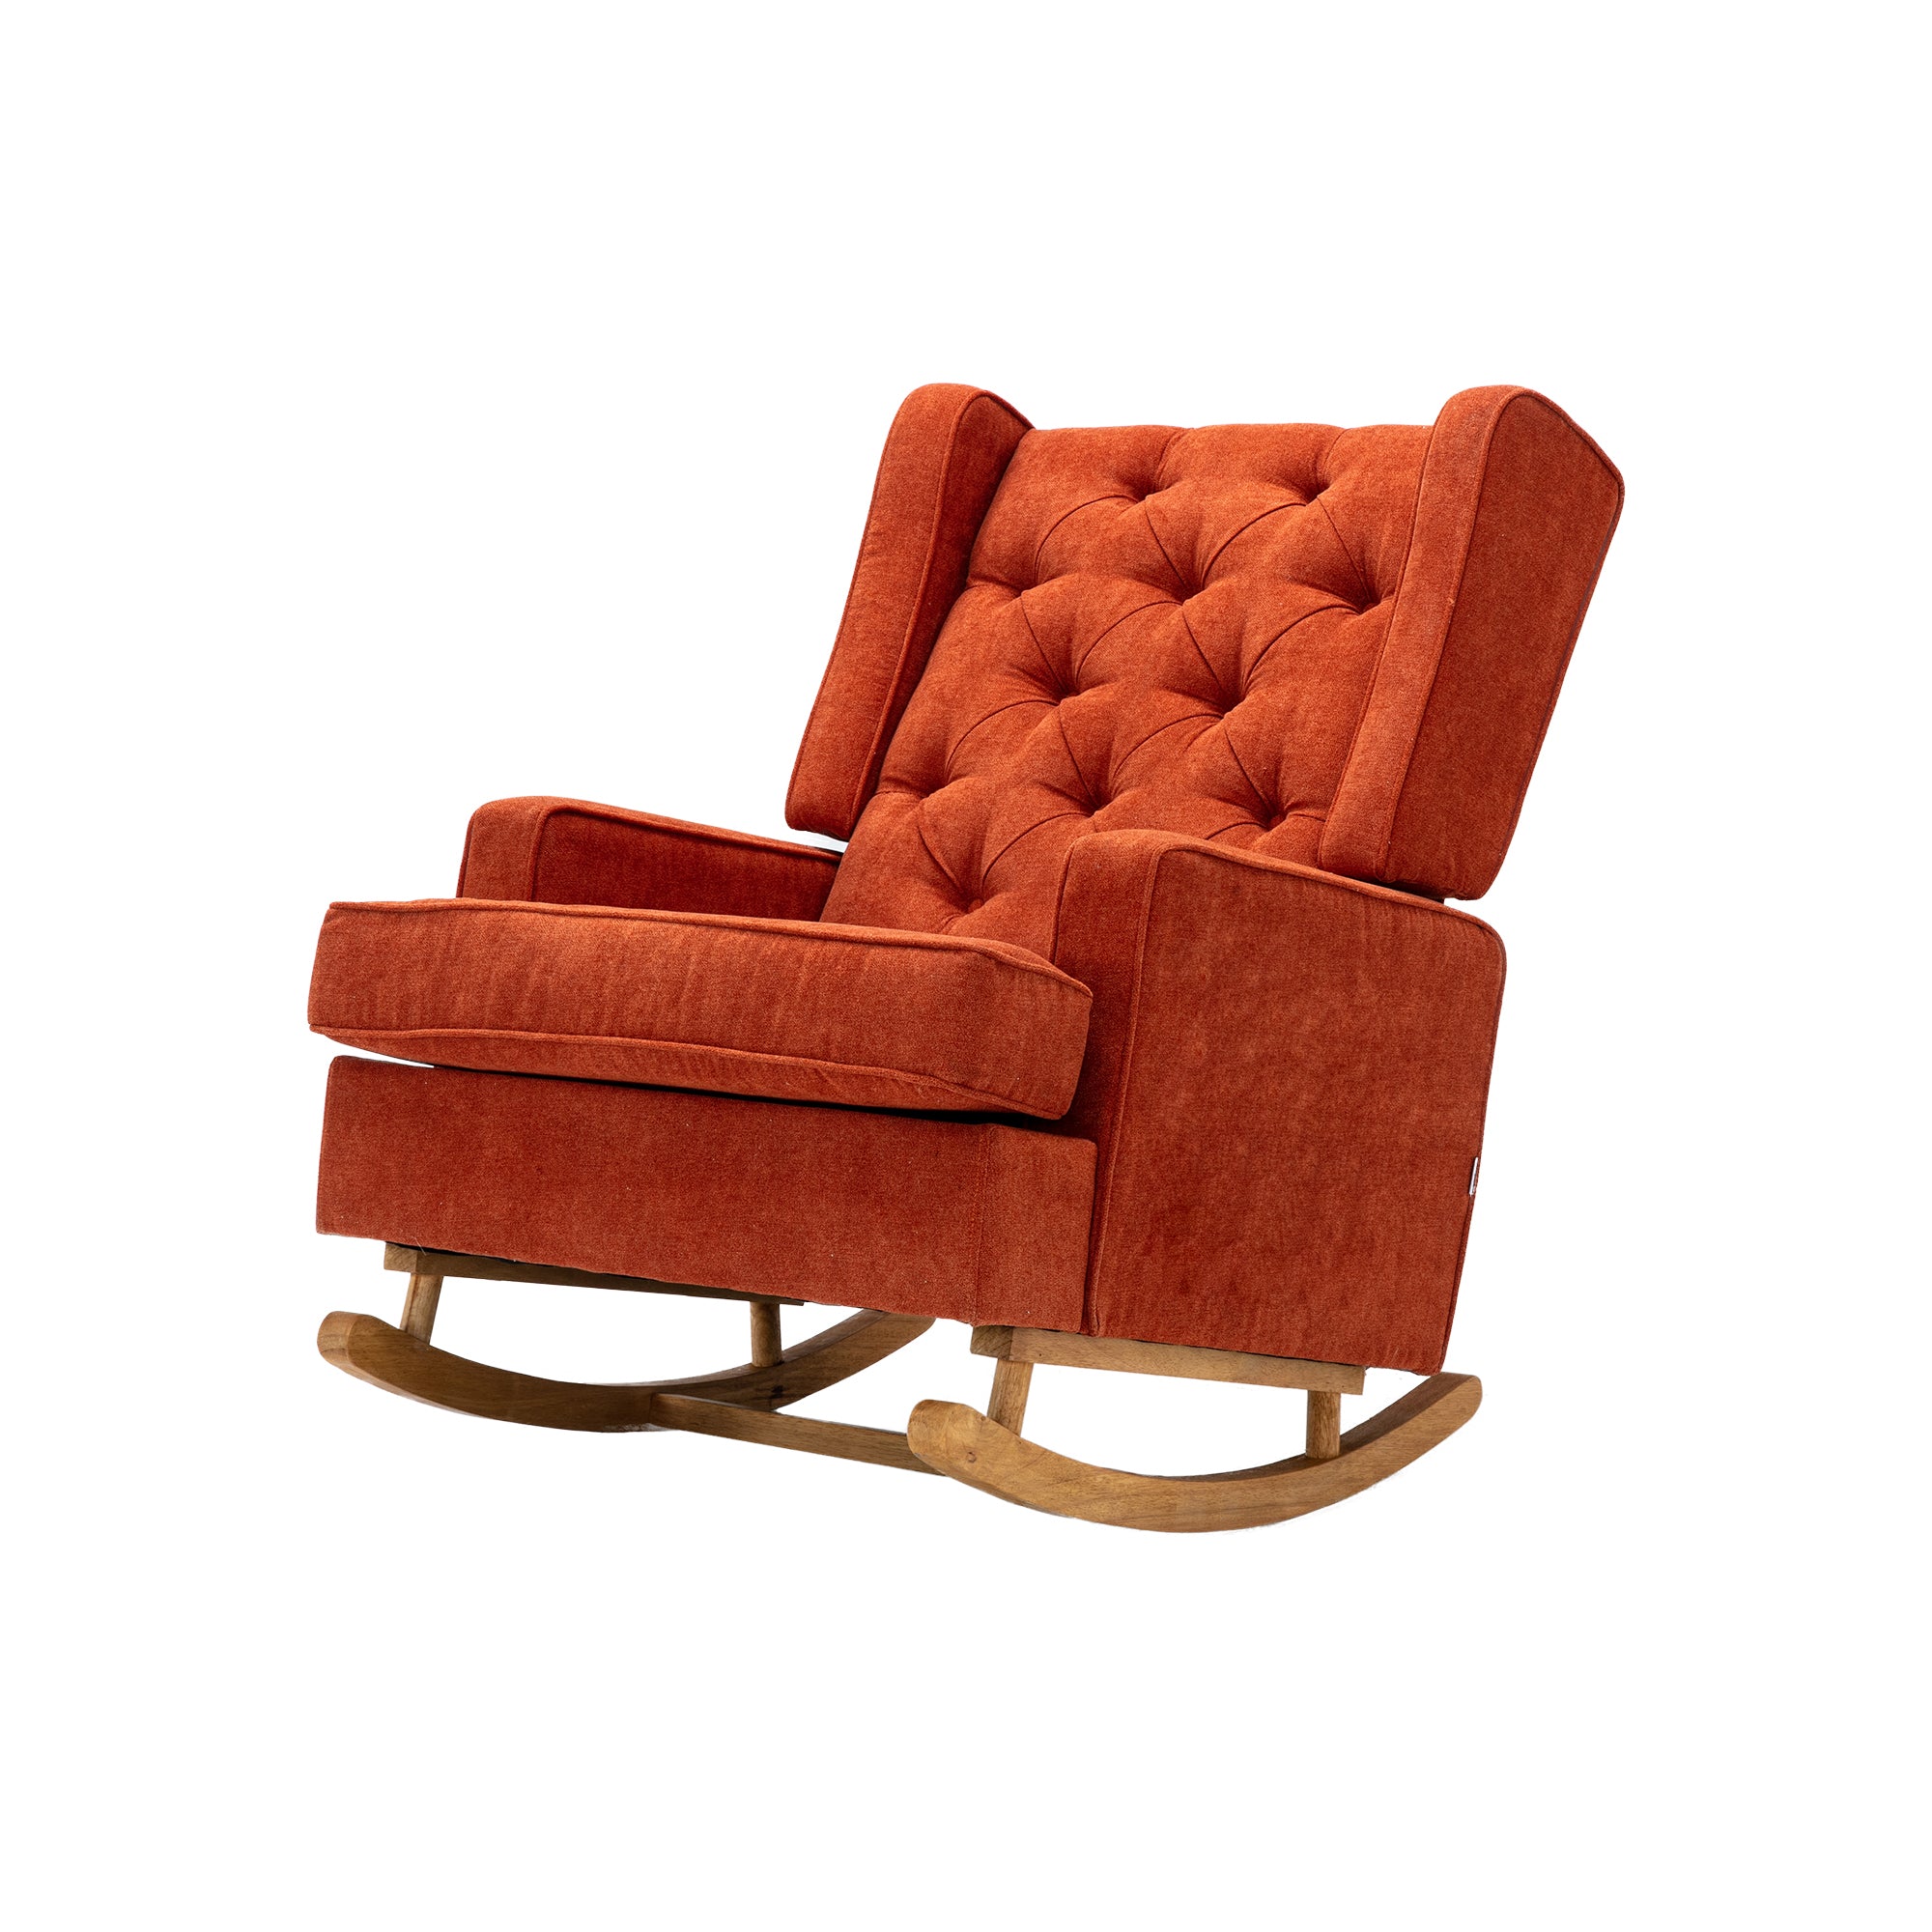 COOLMORE living room Comfortable rocking chair accent orange-polyester